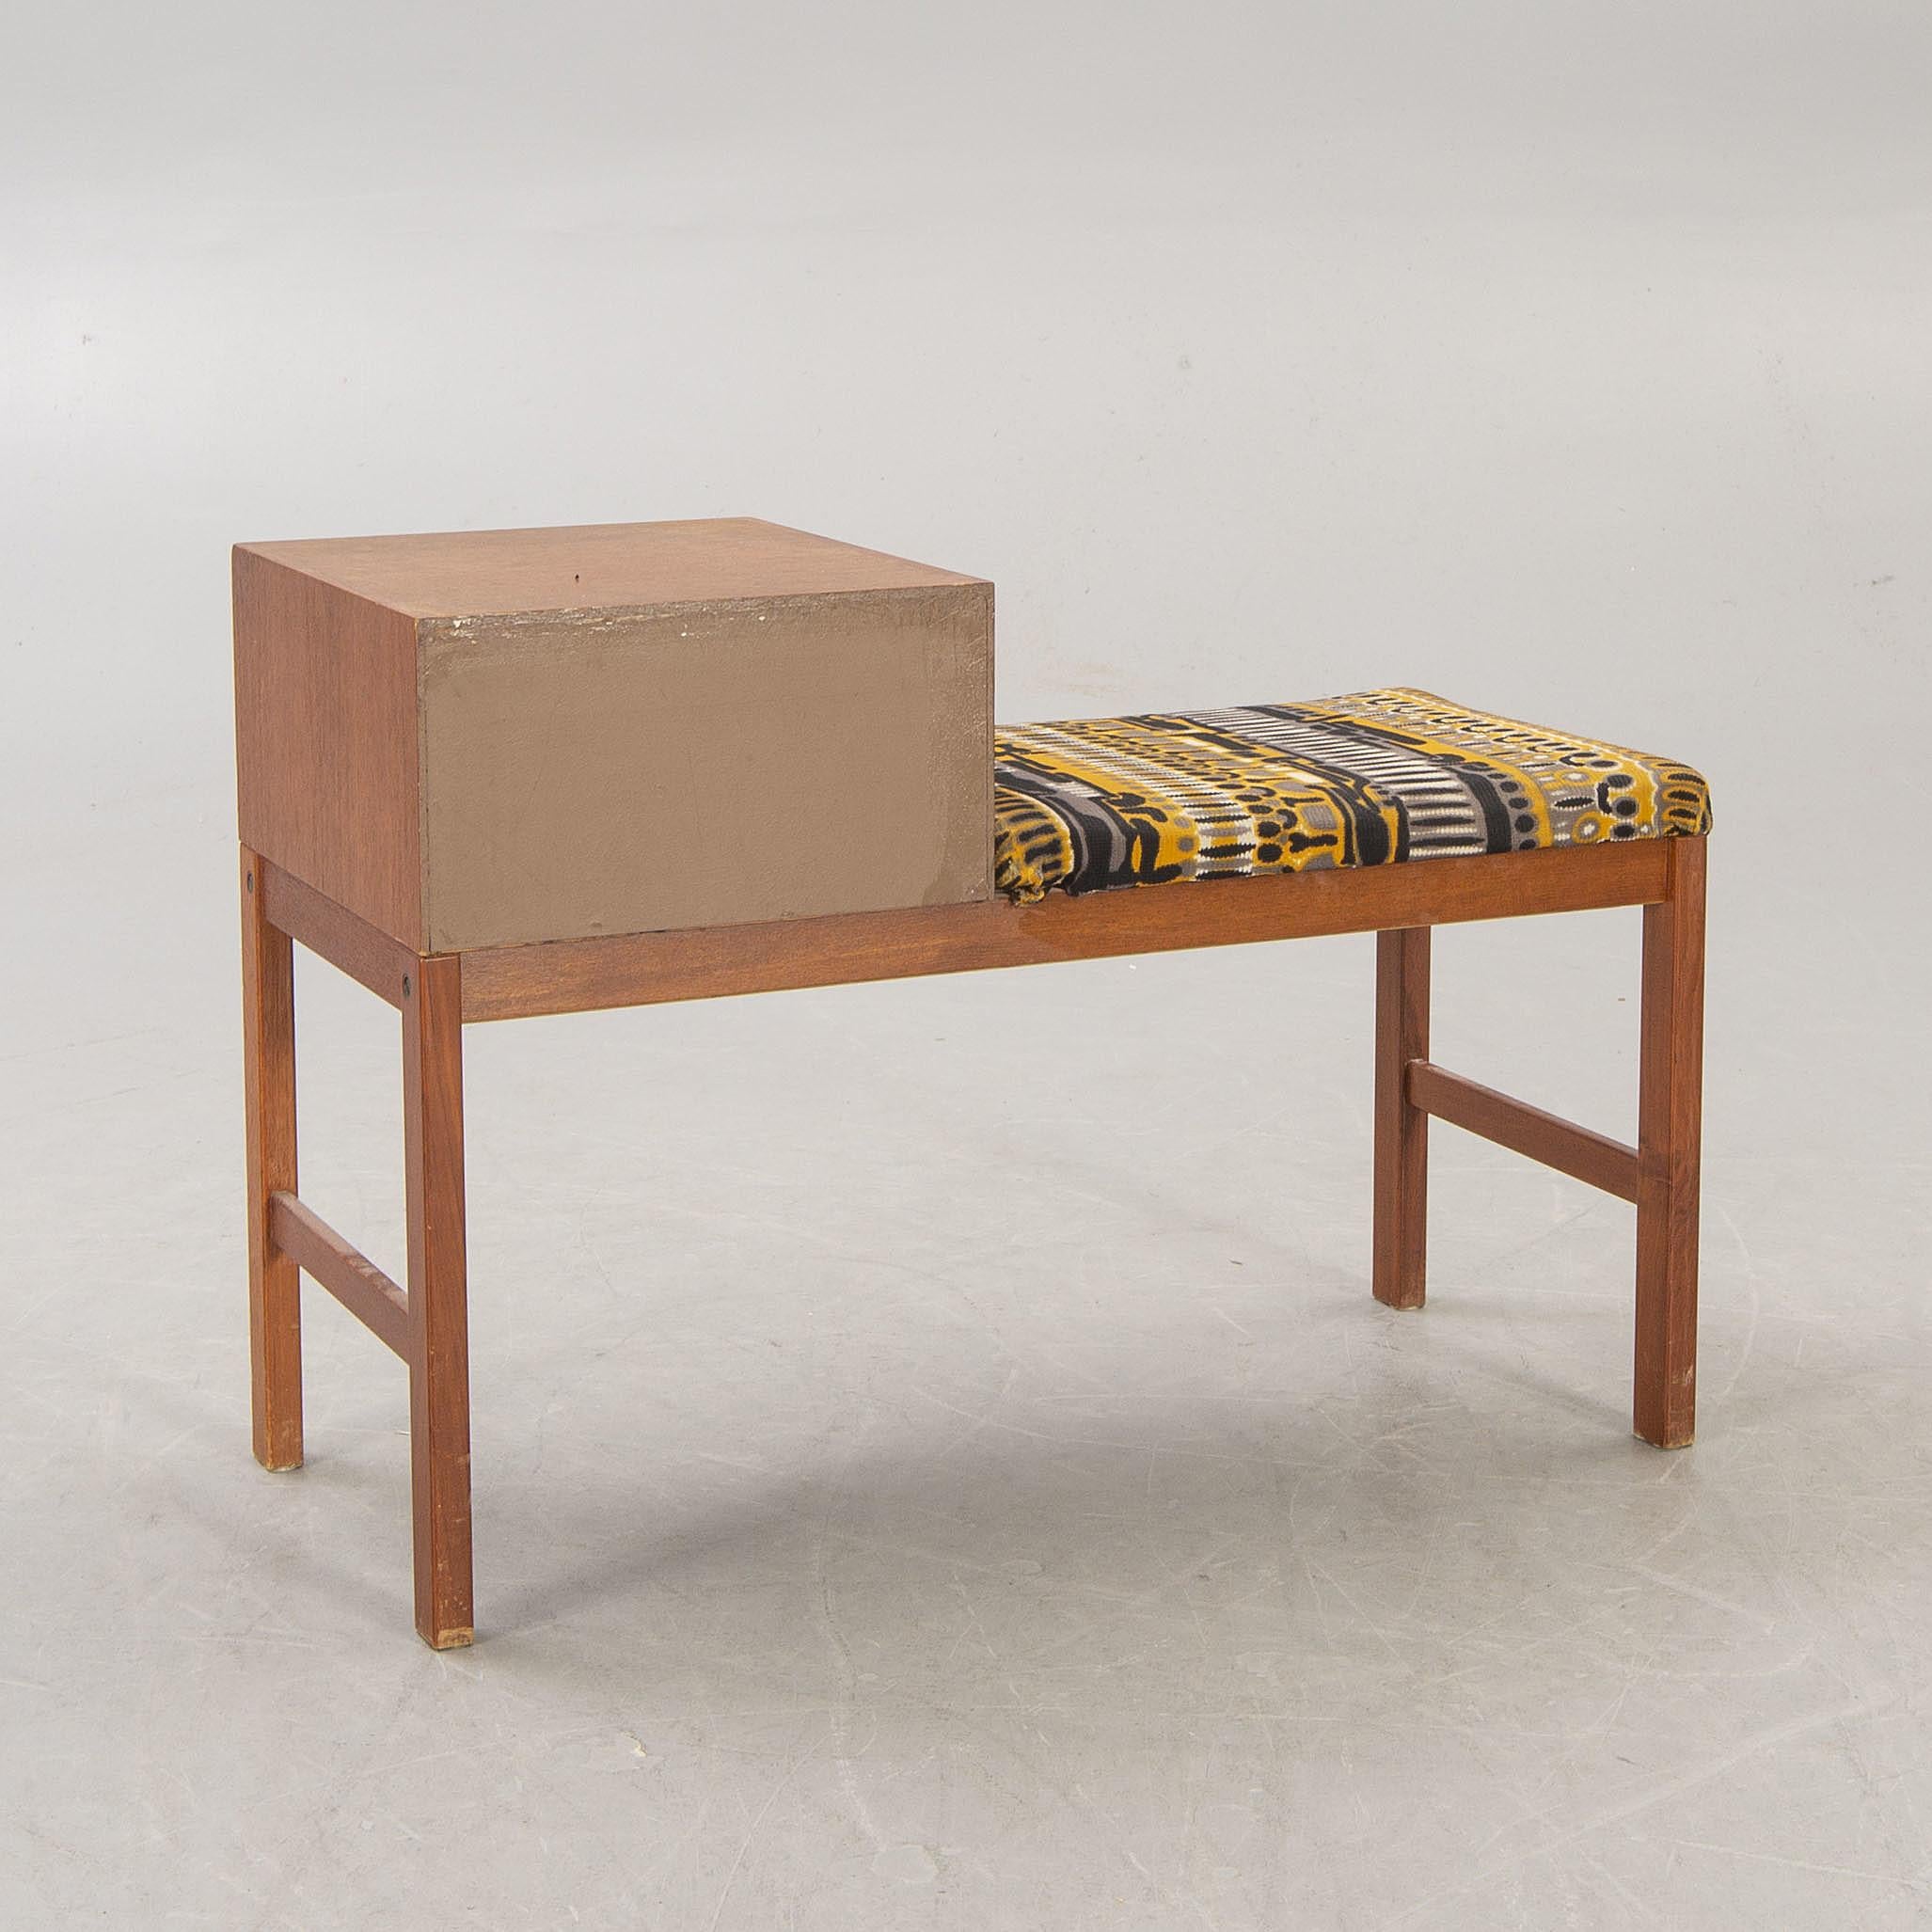 Teak bench and chest by Tingstrom Sweden, 1960 

Good vintage condition, upholstered with original fabric.